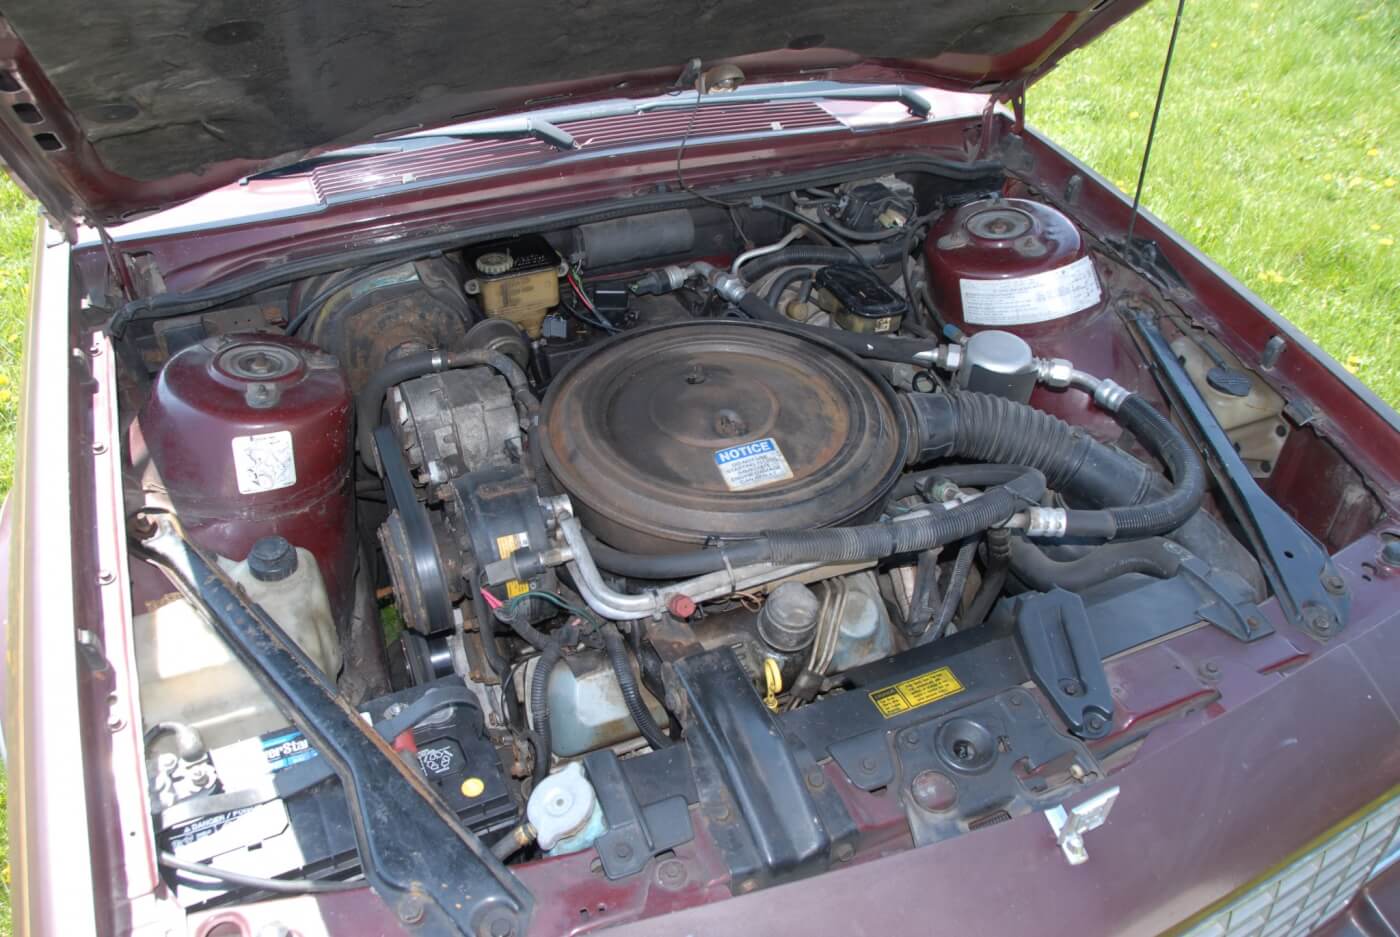 The 4.3L diesel was the biggest and heaviest powerplant to be fitted into the front drive A-body platform, and it pretty much fills the engine compartment. The 4.3 was shorter than the 350 but just as wide. The serpentine belt setup used on the front-drive cars both lightened and shortened the engine.